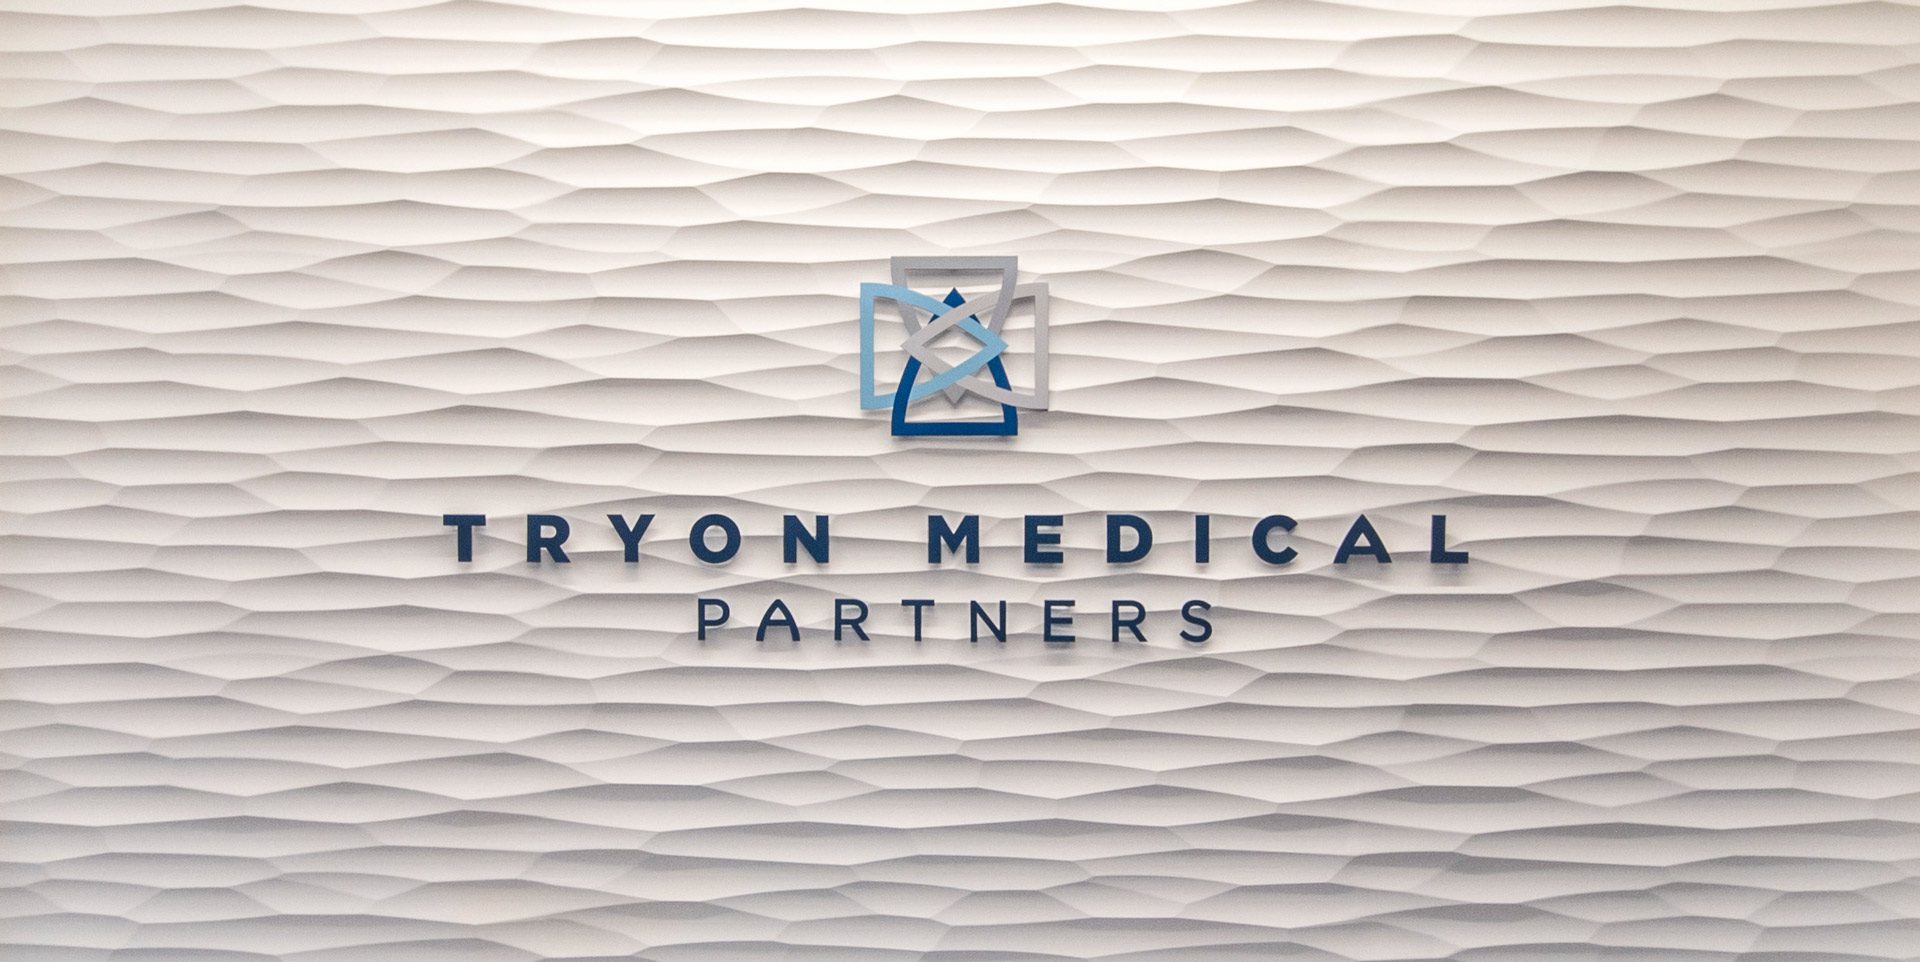 Marvin-Crossing-Tryon-Medical-Partners-sign white textured